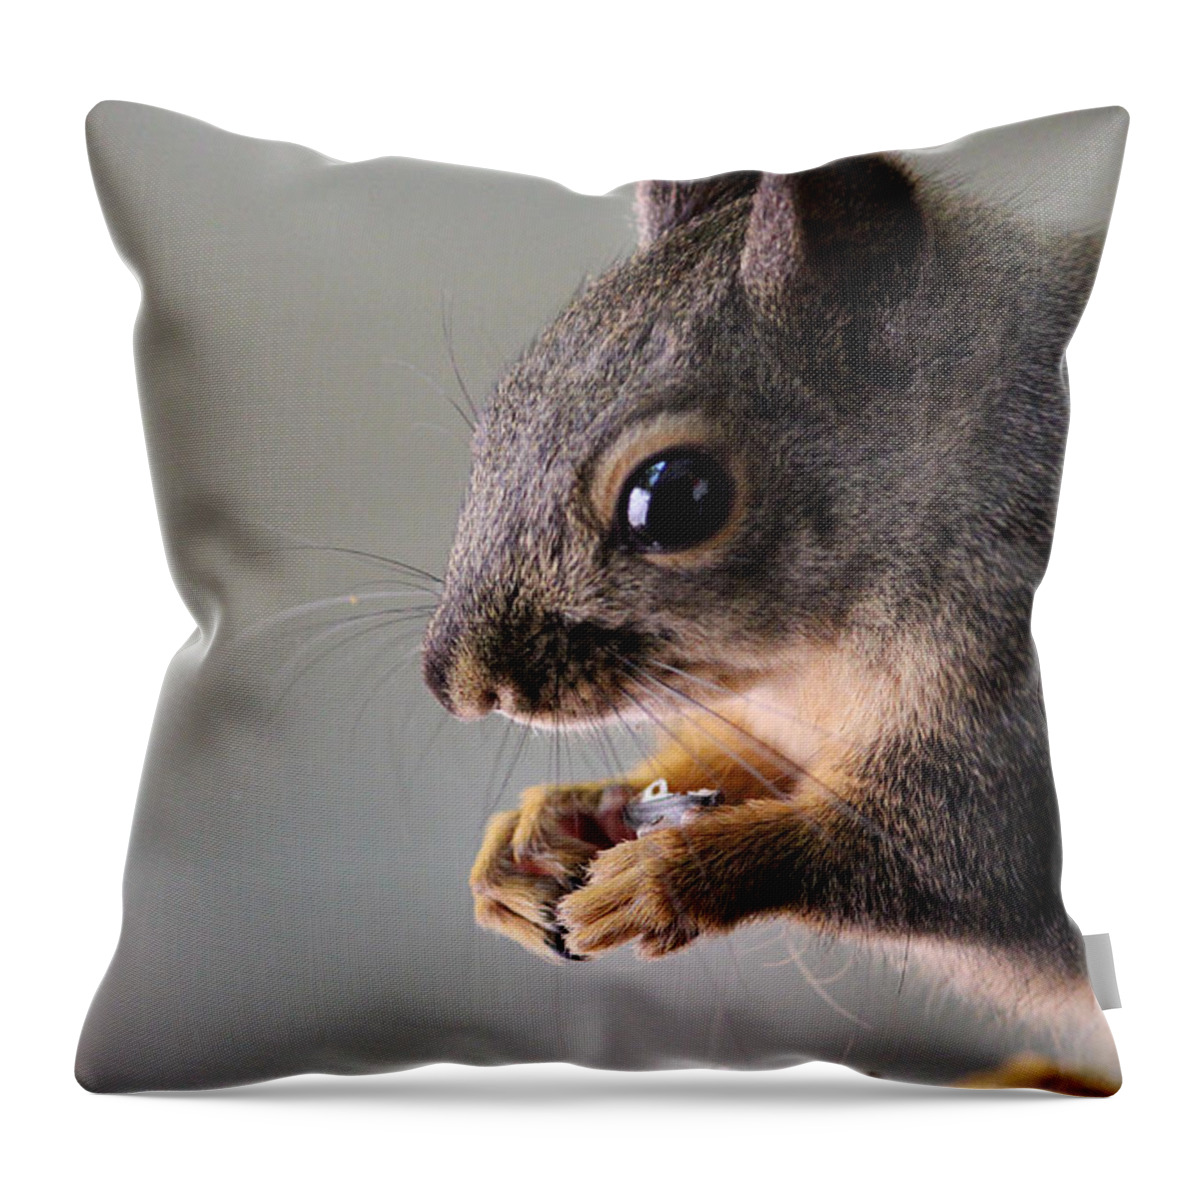 Mammals Throw Pillow featuring the photograph I open the seed like this by Kym Backland